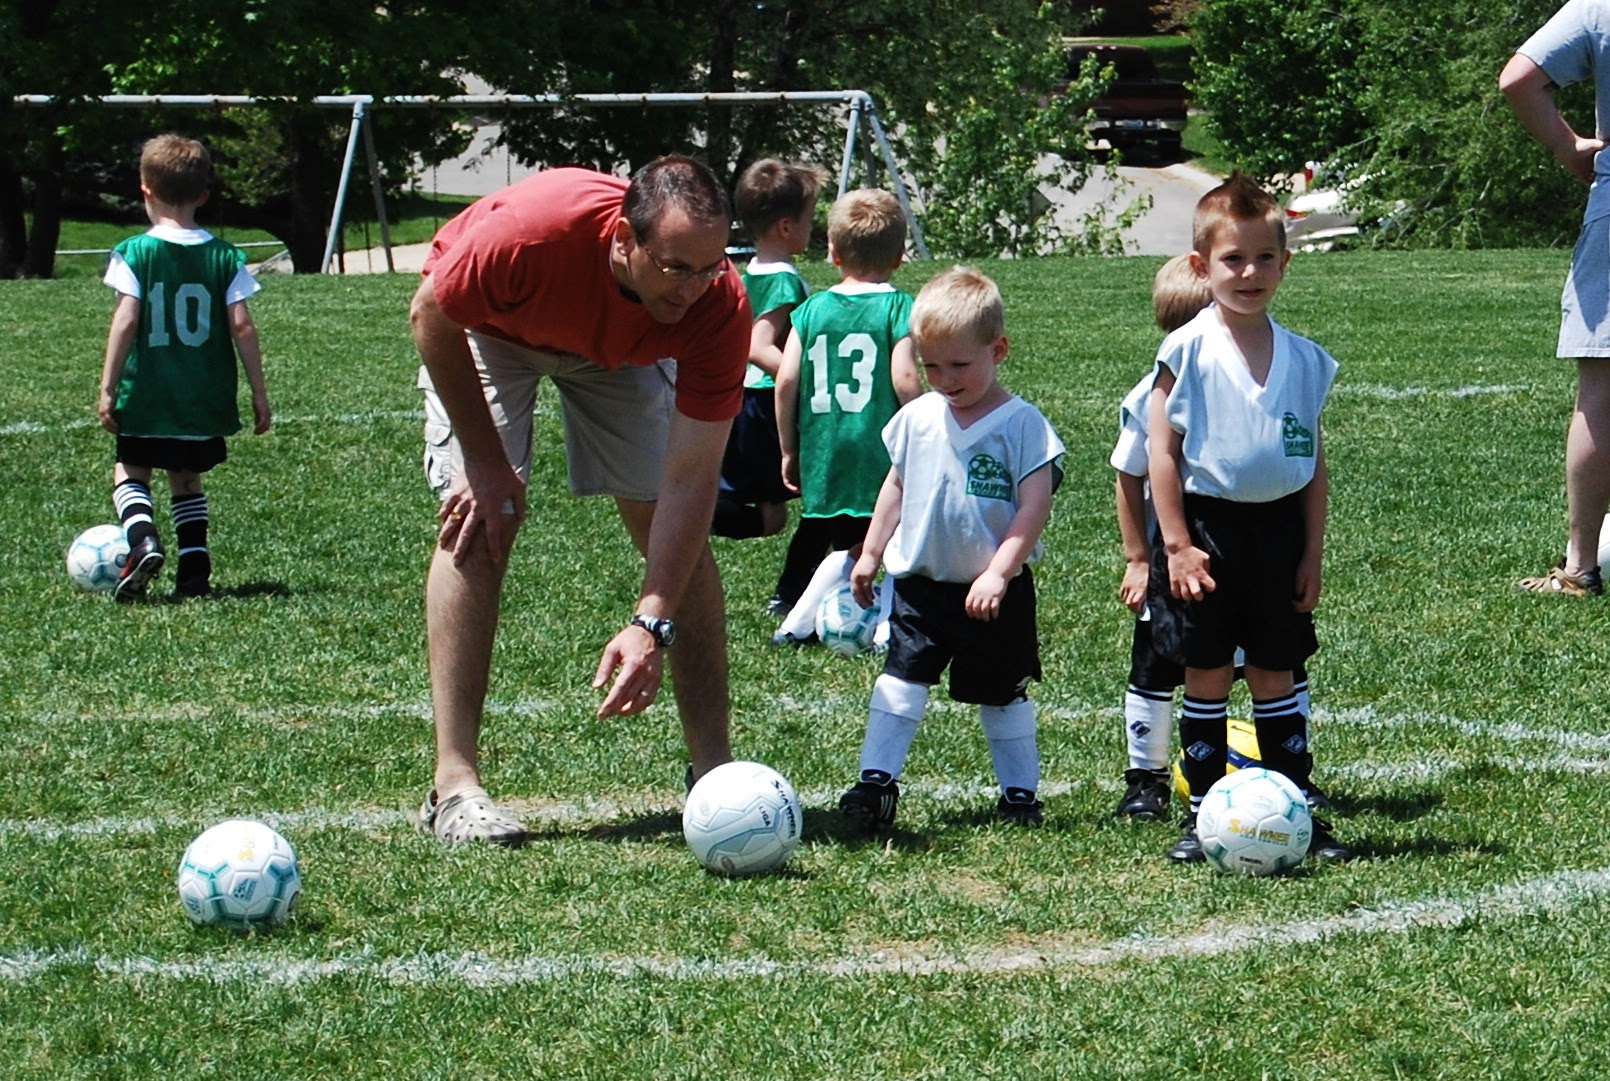 John practicing soccer with kids